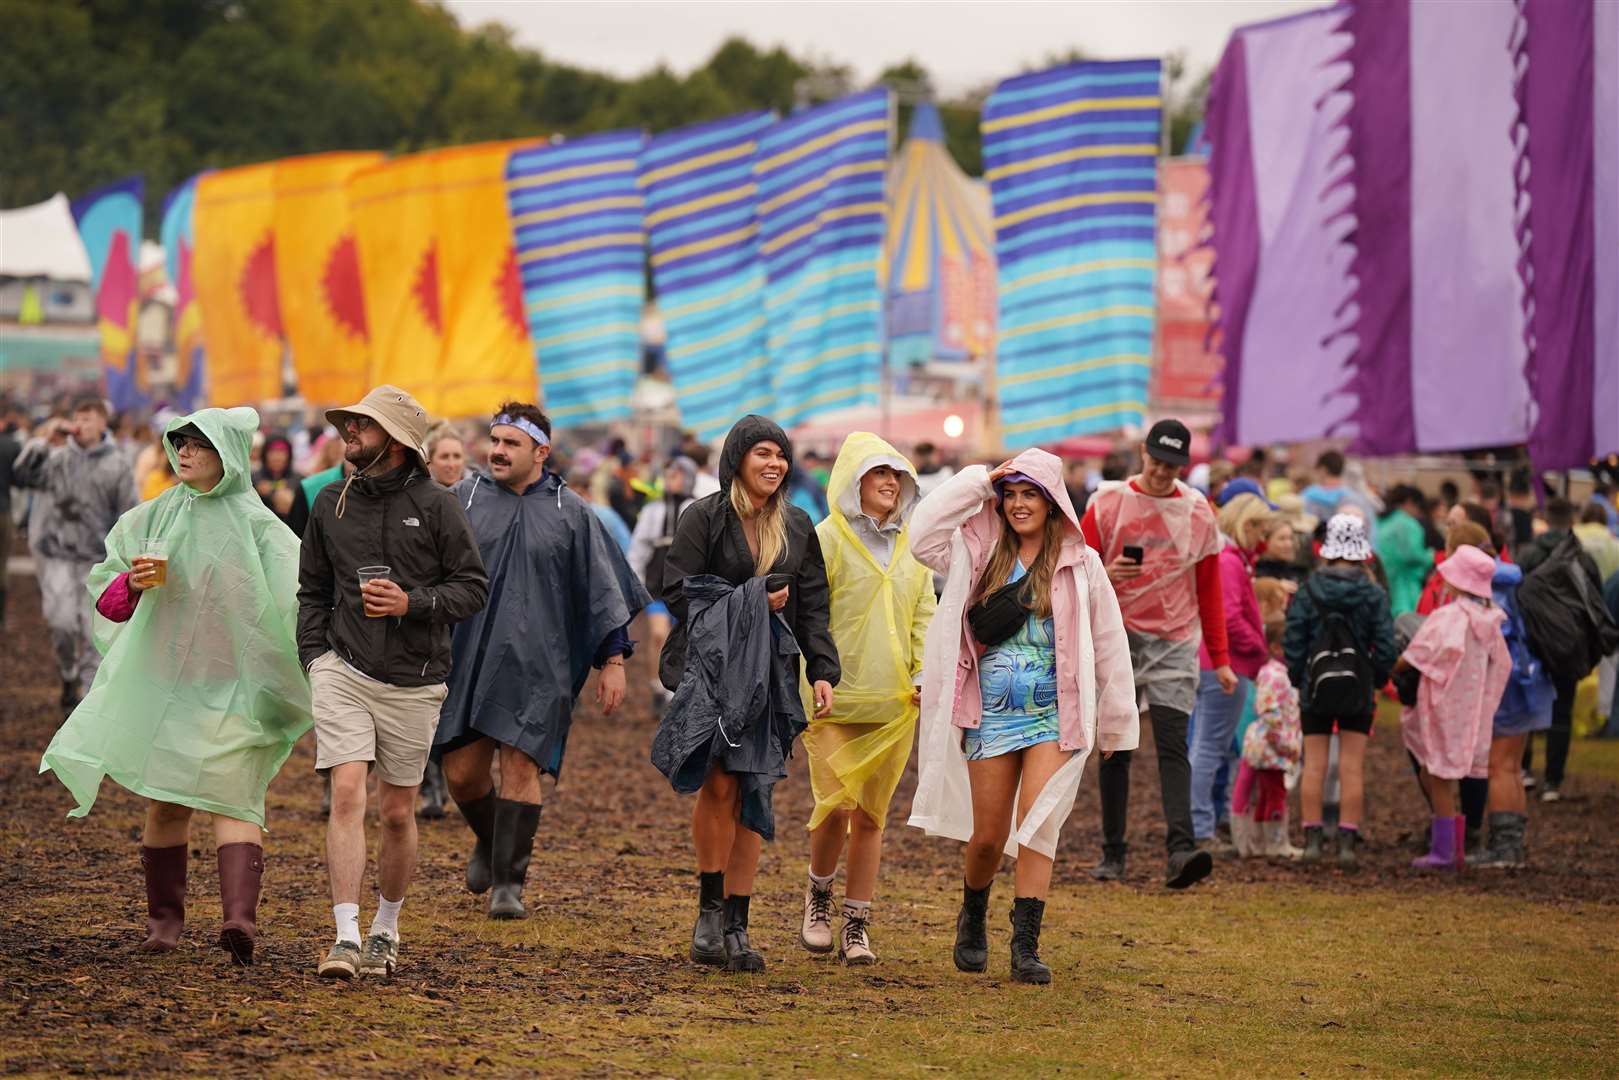 Revellers arriving for the Electric Picnic Festival in Stradbally, County Laois (Niall Carson/PA)